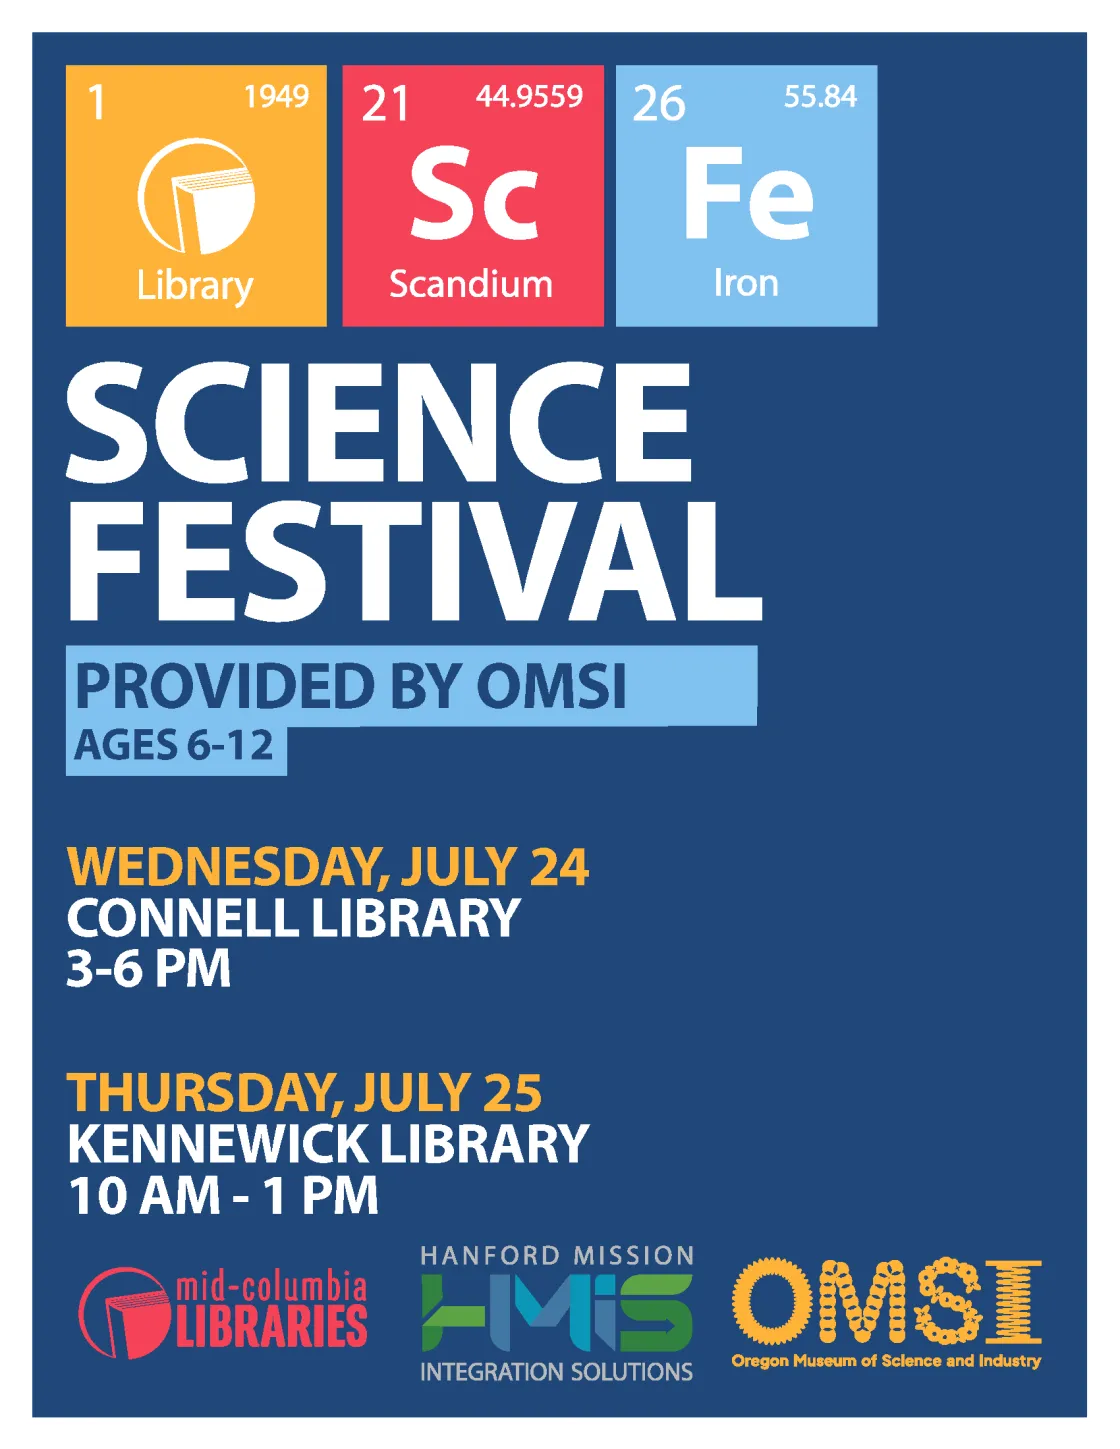 Poster with details on the science festival provided by OMSI.